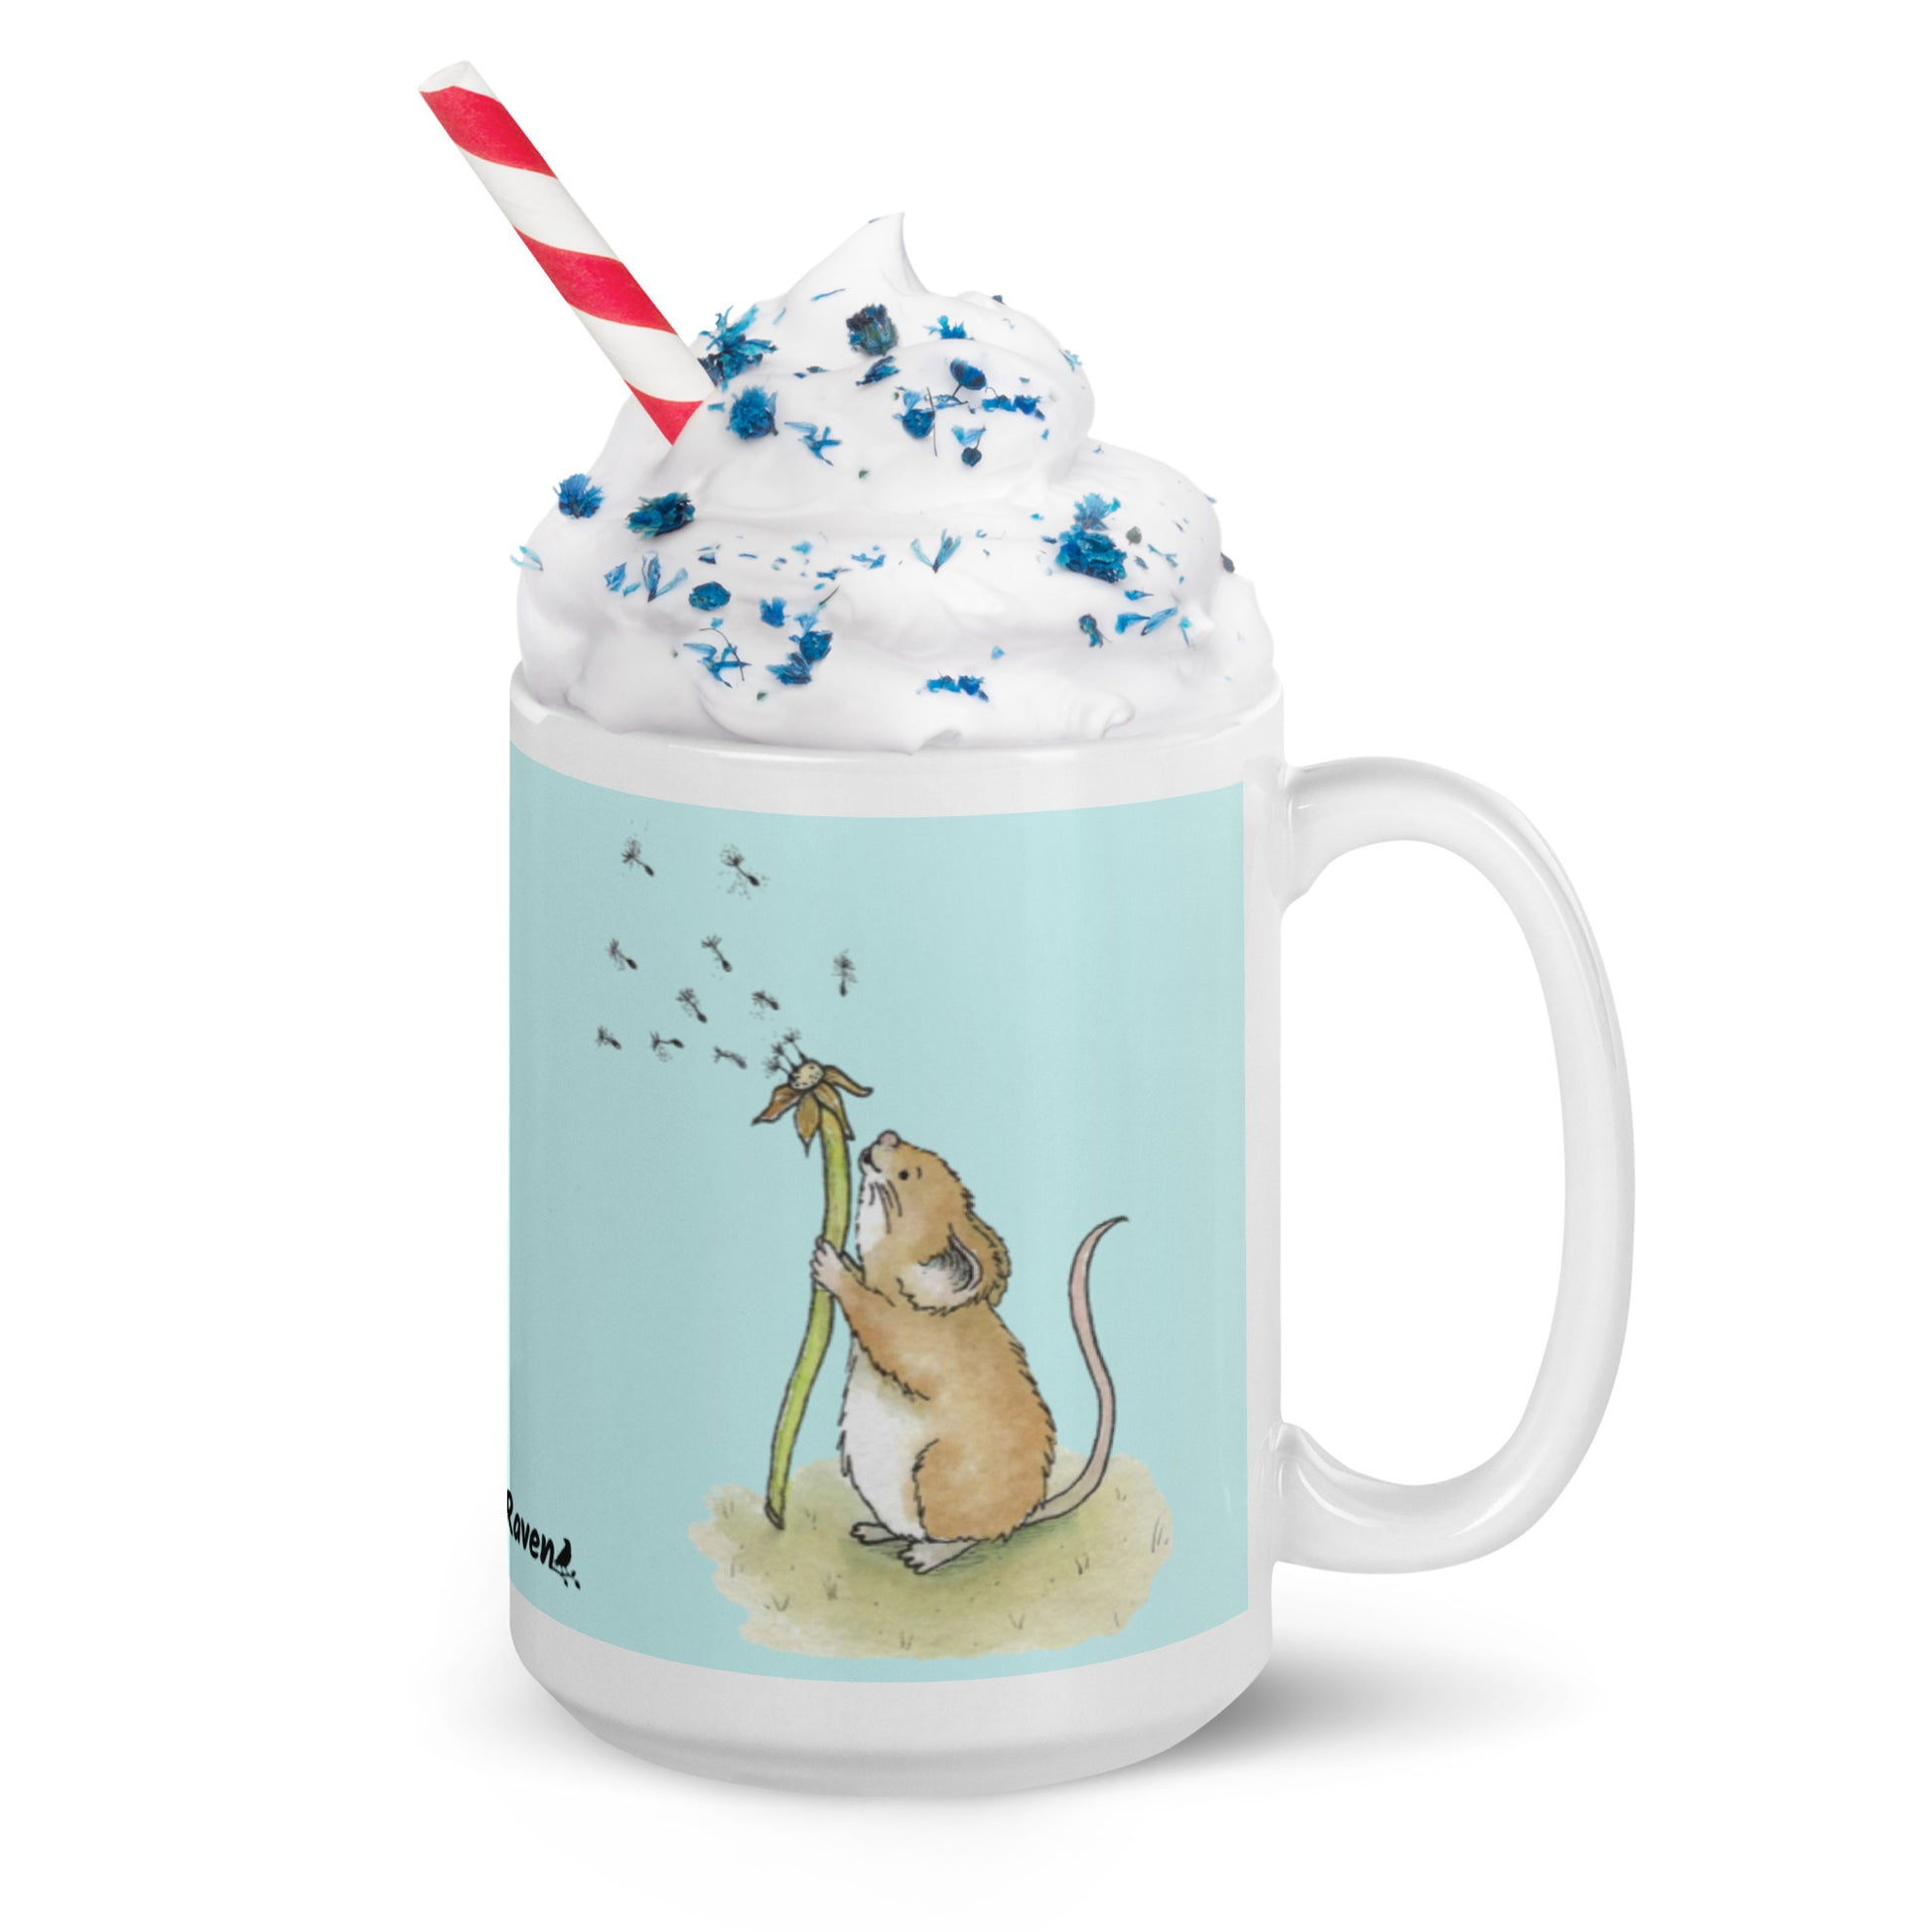 Two-sided image of original Dandelion wish design of cute watercolor mouse blowing dandelion seeds  featured on 15 ounce mug with light blue background. Handle facing right.